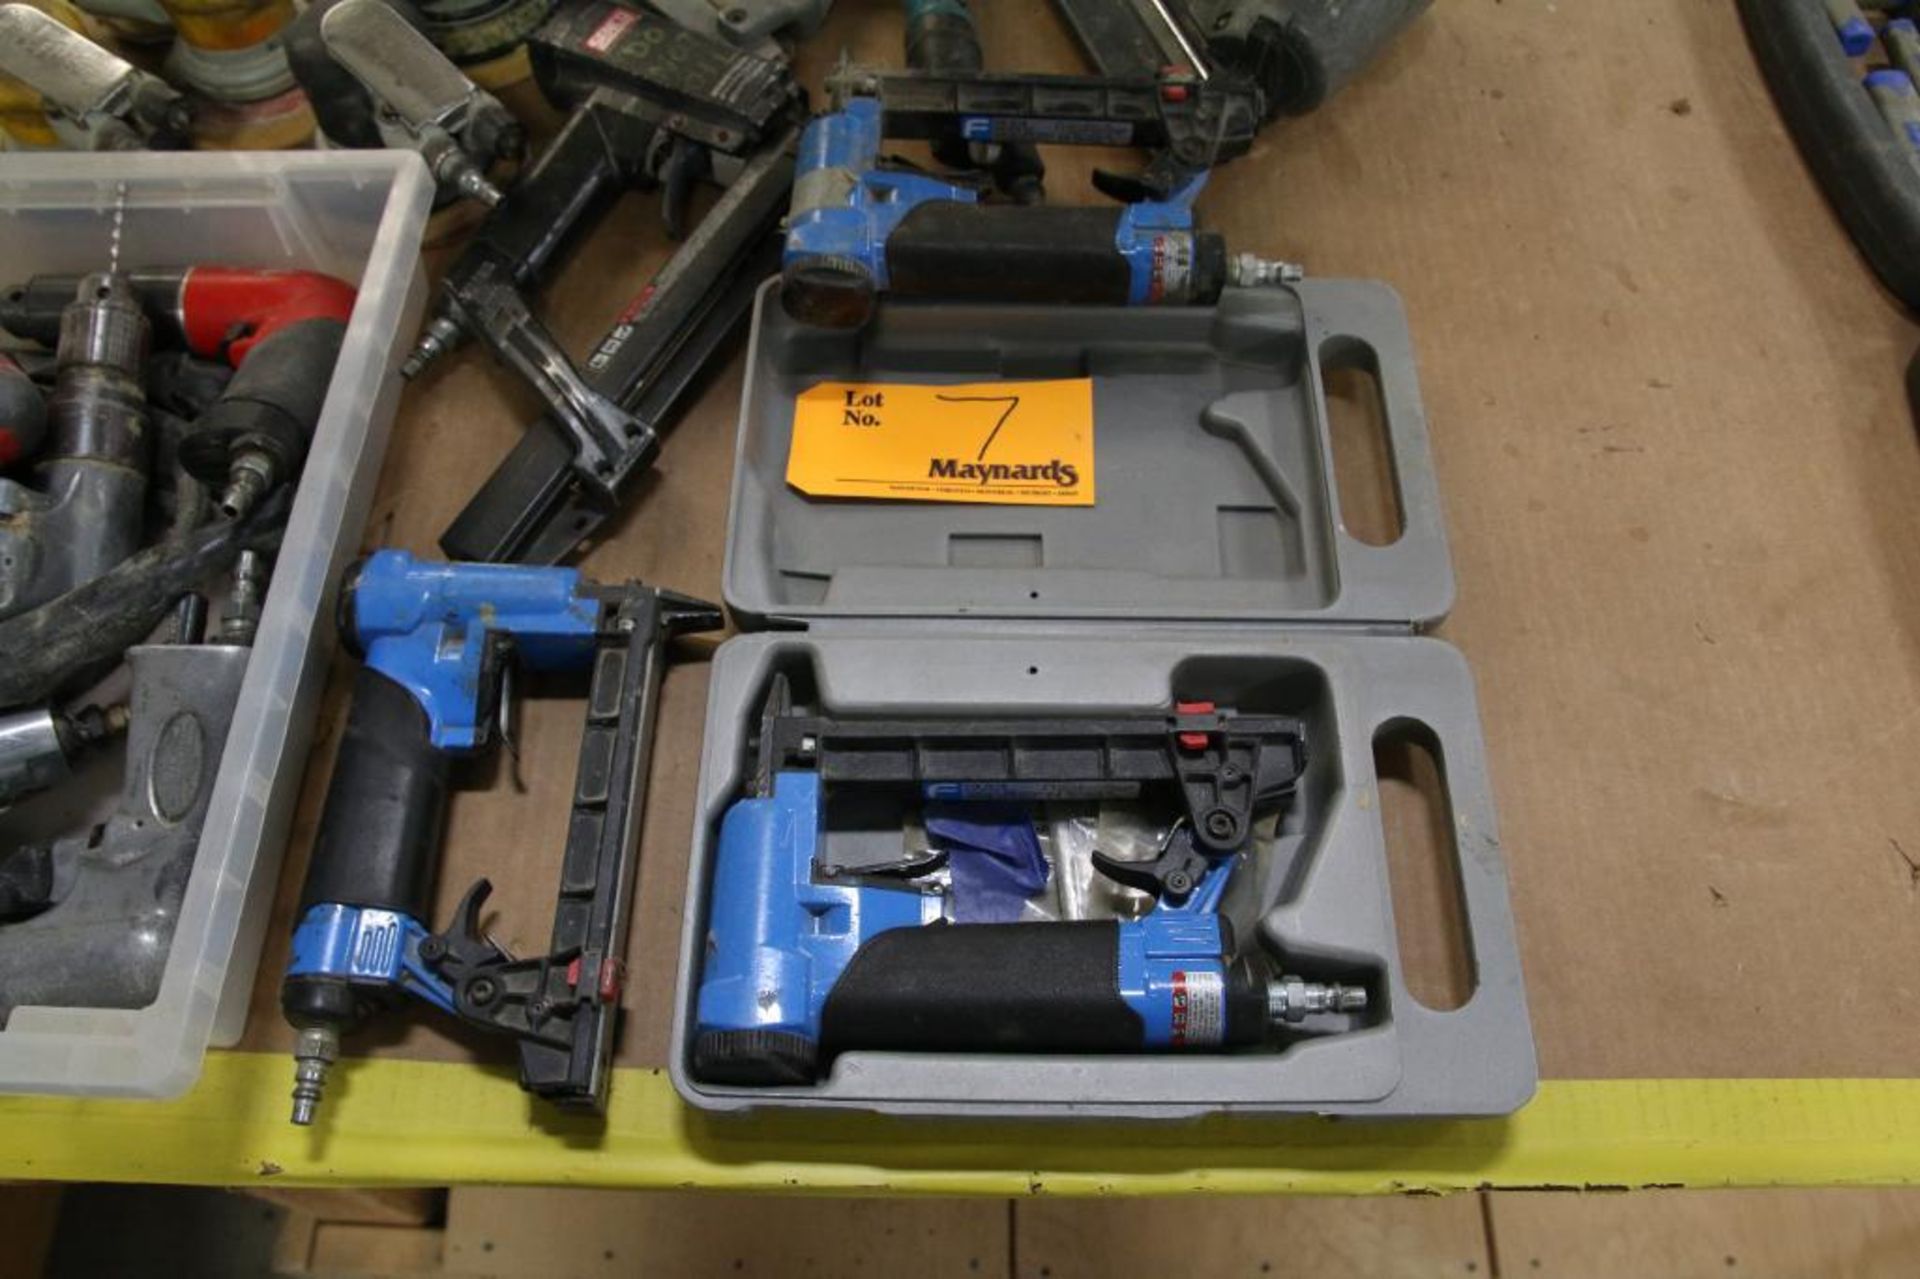 LOT: Air-Powered Hand Tools Including Orbital Sanders, Drills, Staple and Nail Guns - Image 4 of 4